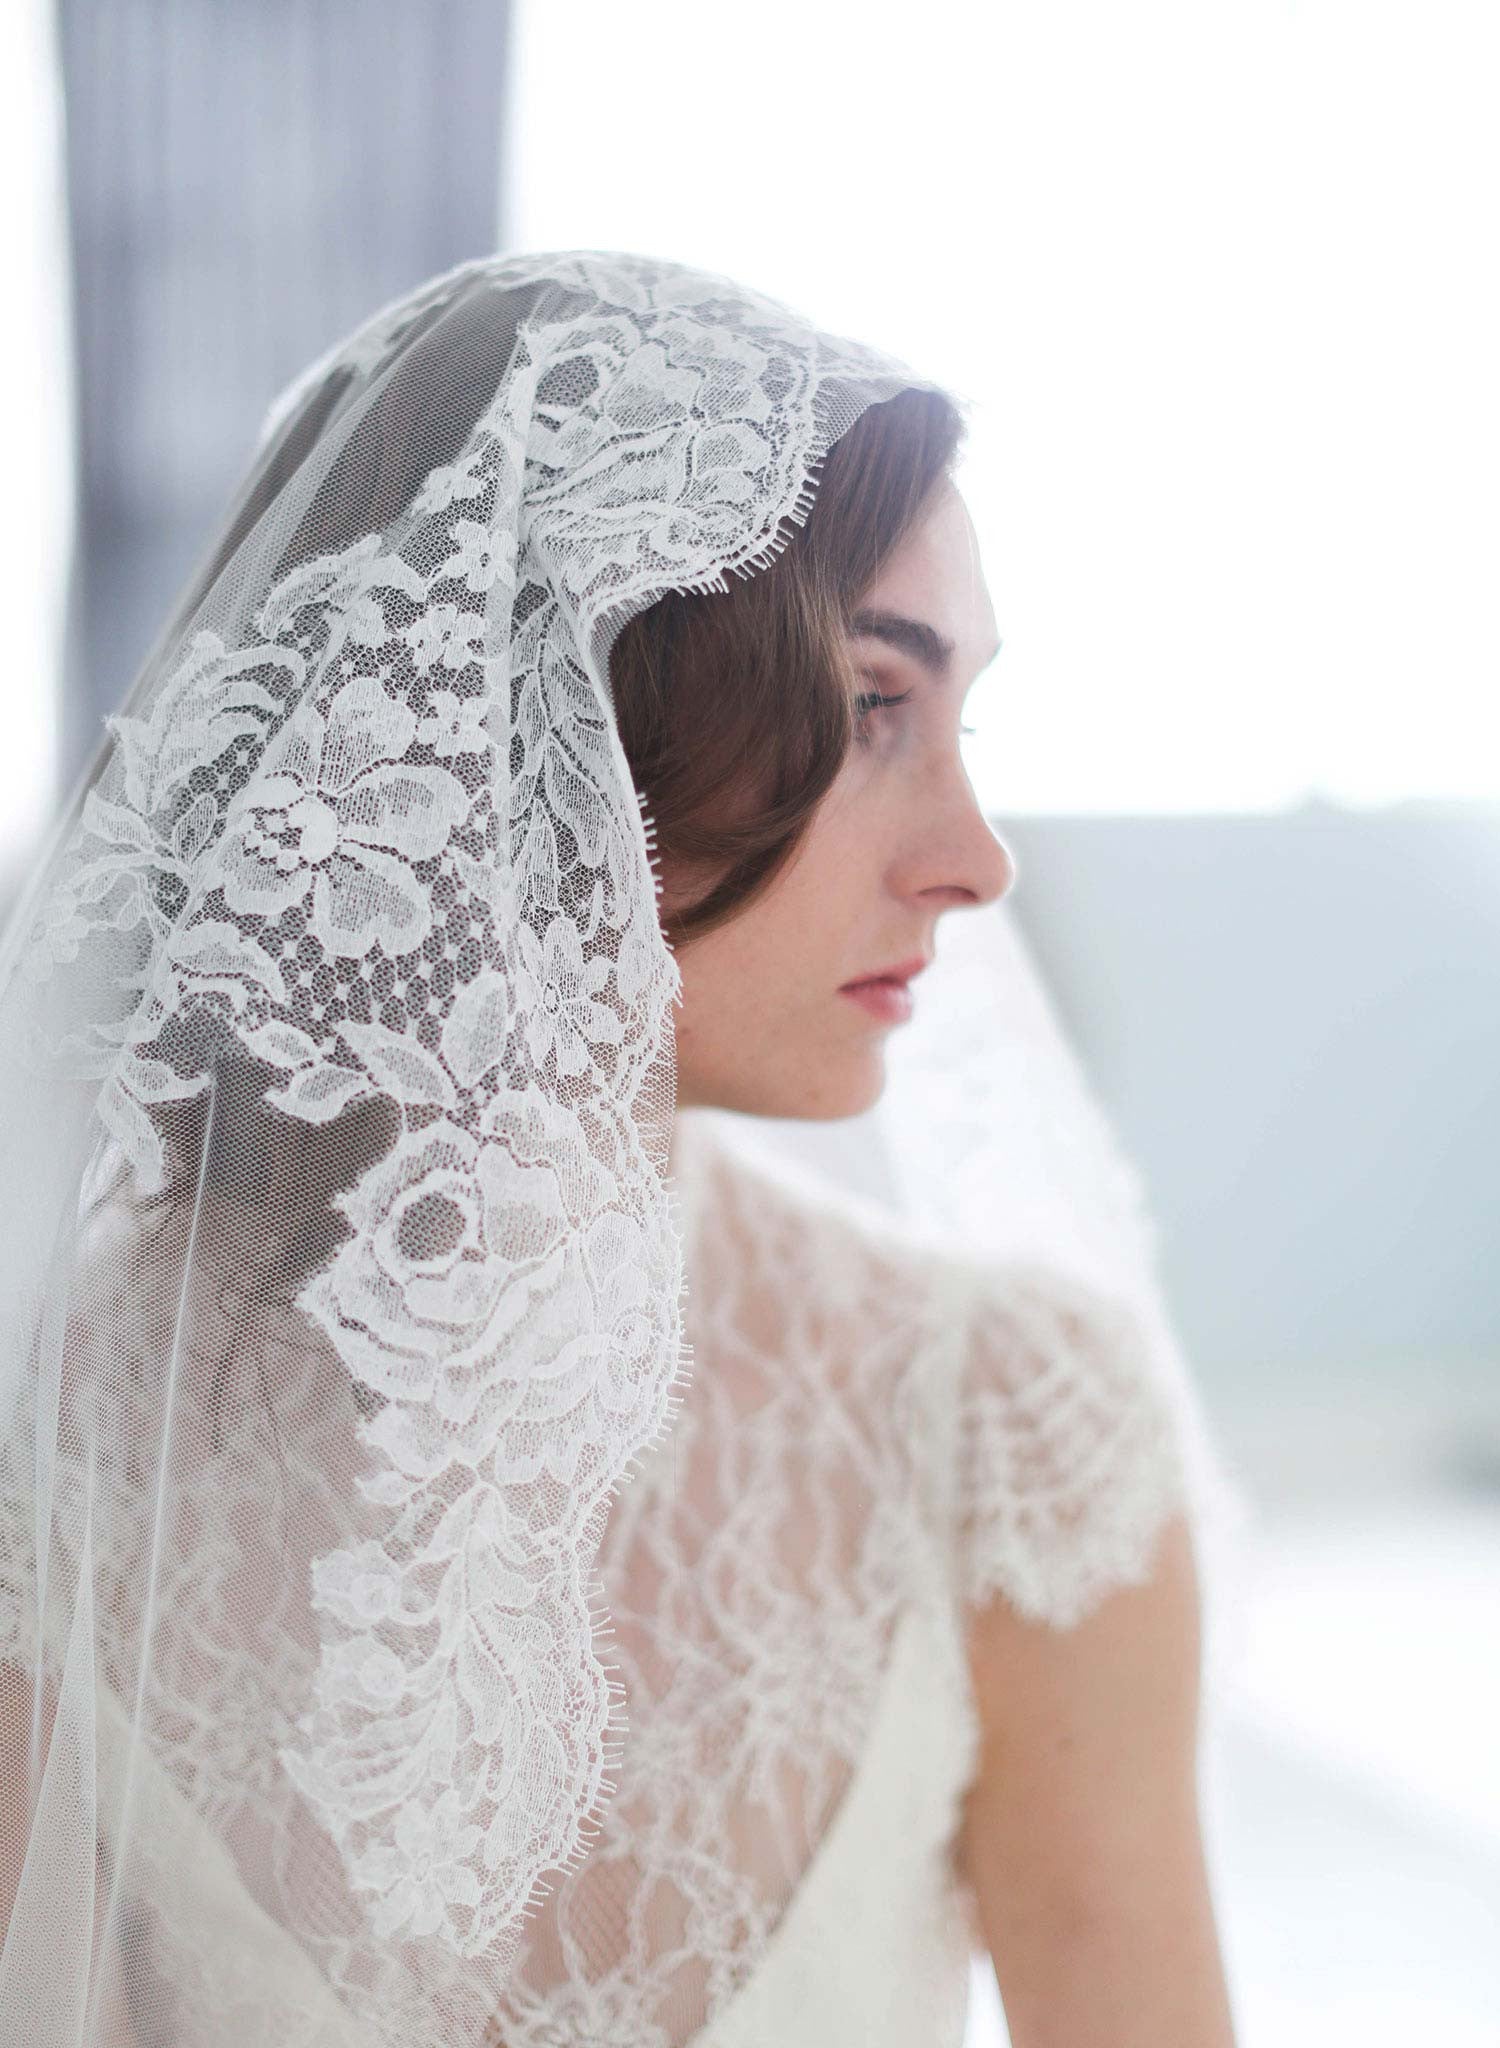 One Layer Fingertip Length Mantilla Bridal Veil with Silver Lace Edge &  Crystals - Mariell Bridal Jewelry & Wedding Accessories